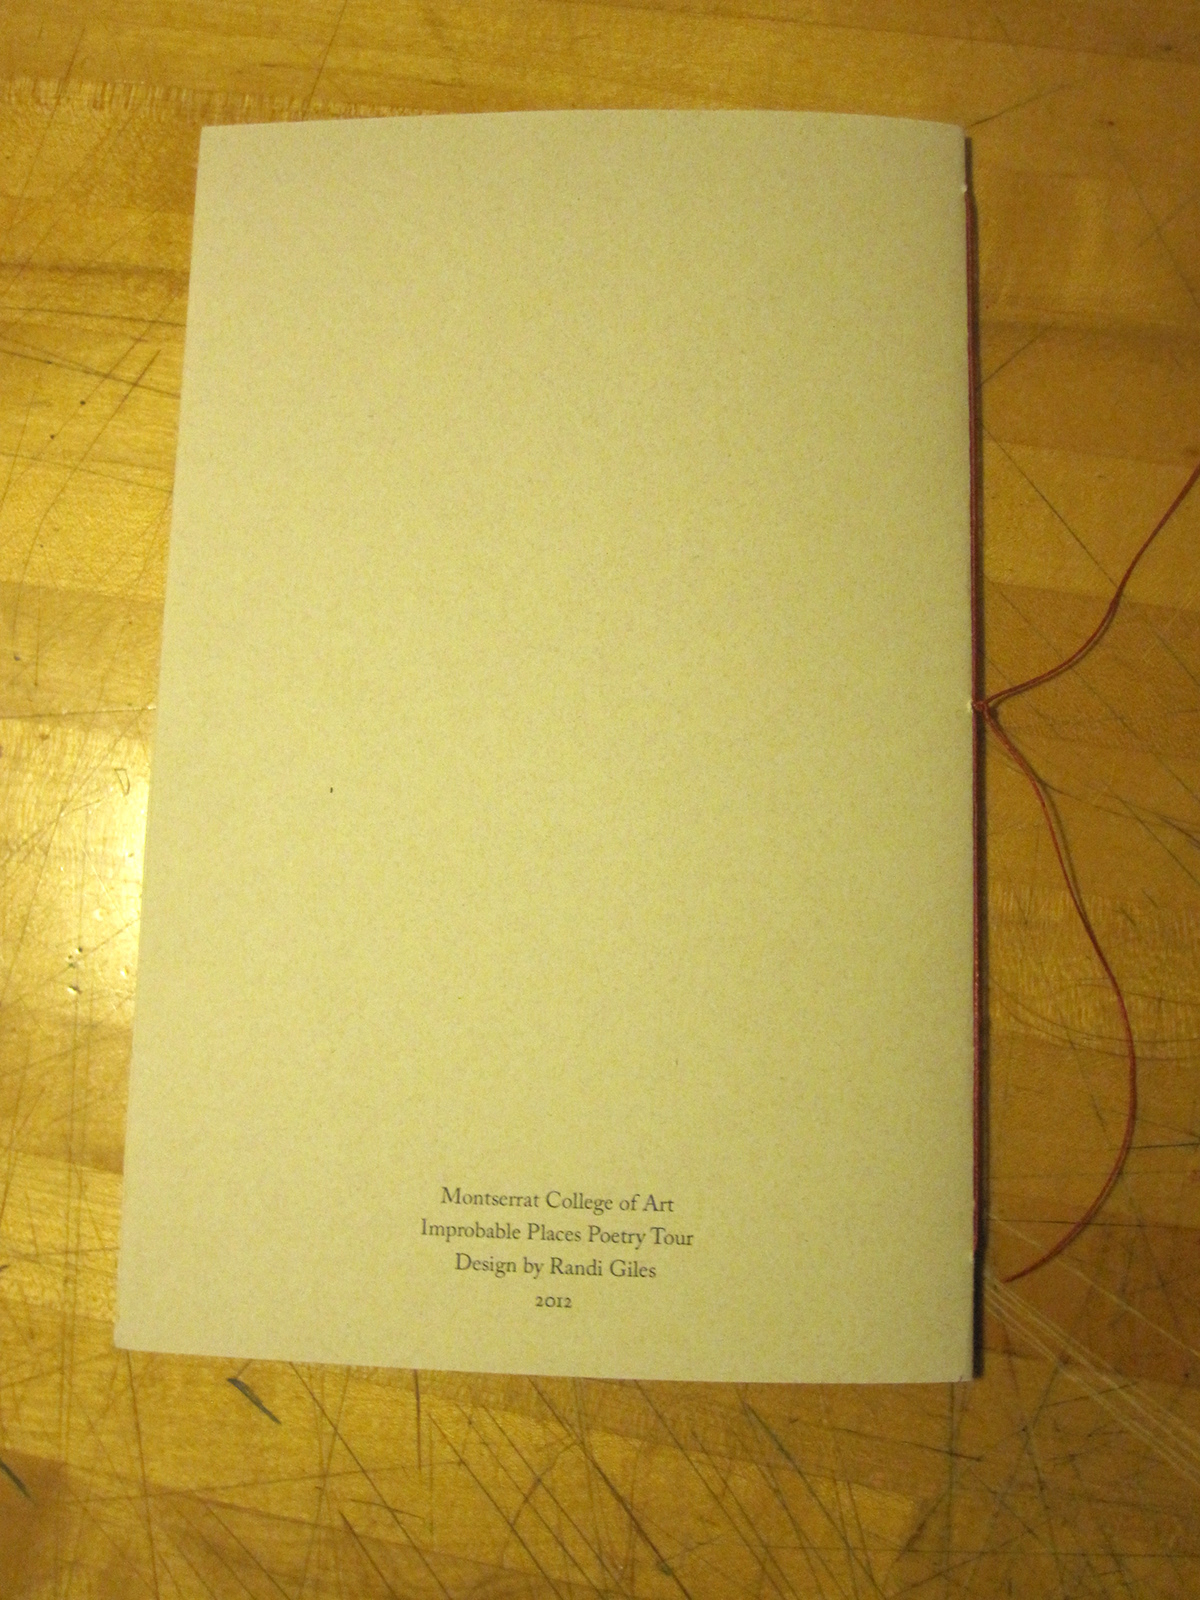 Poetry  pamphlet menu inserts hand stitched